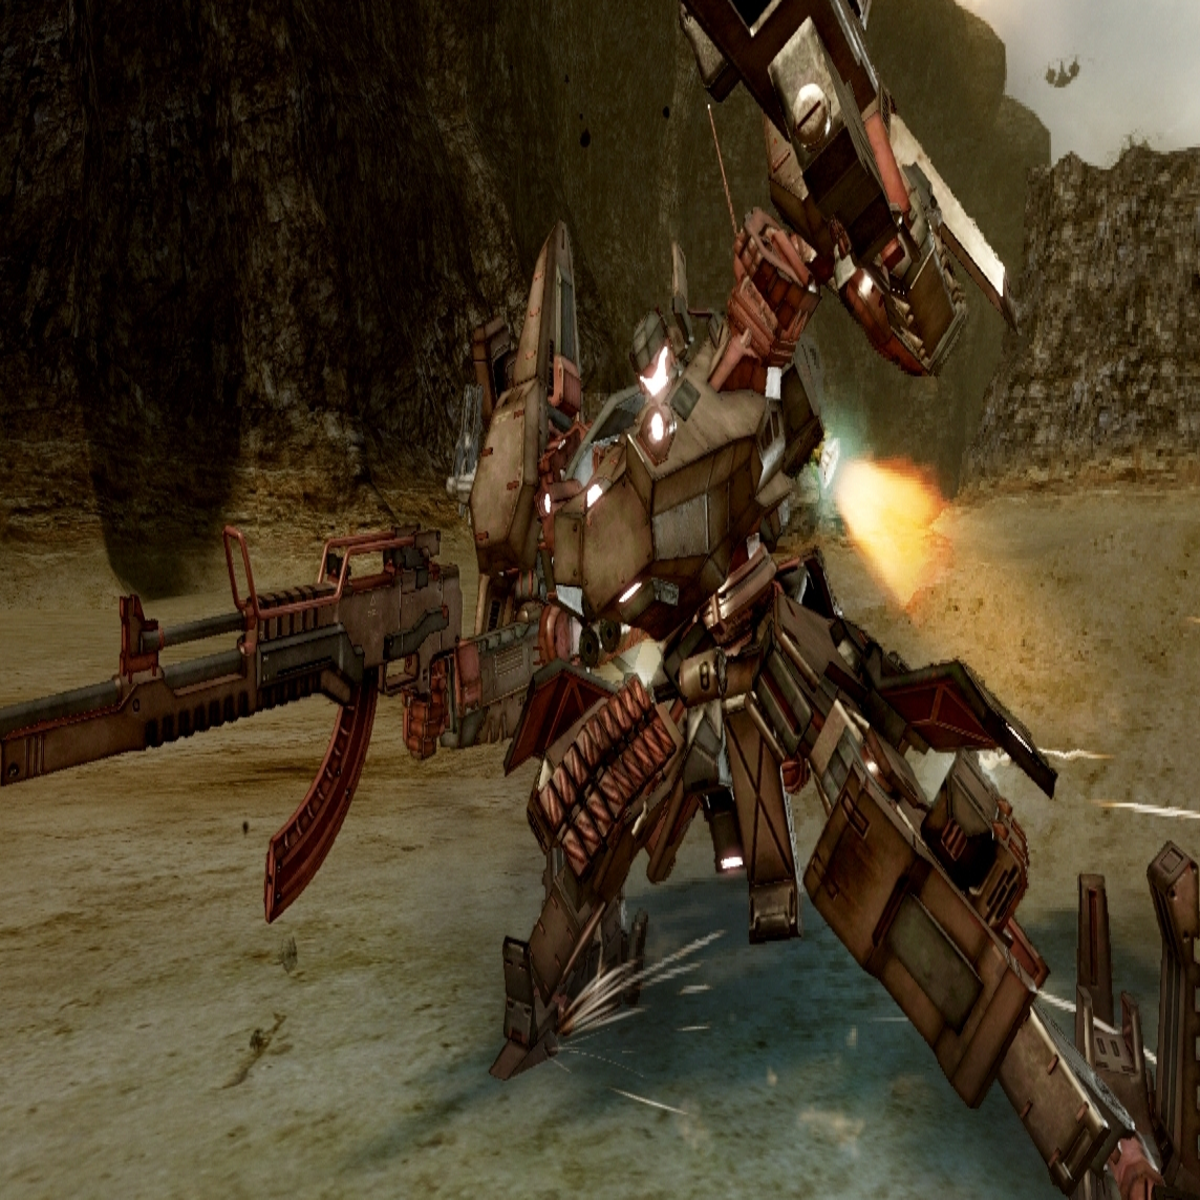 From Software may be working on a new Armored Core game